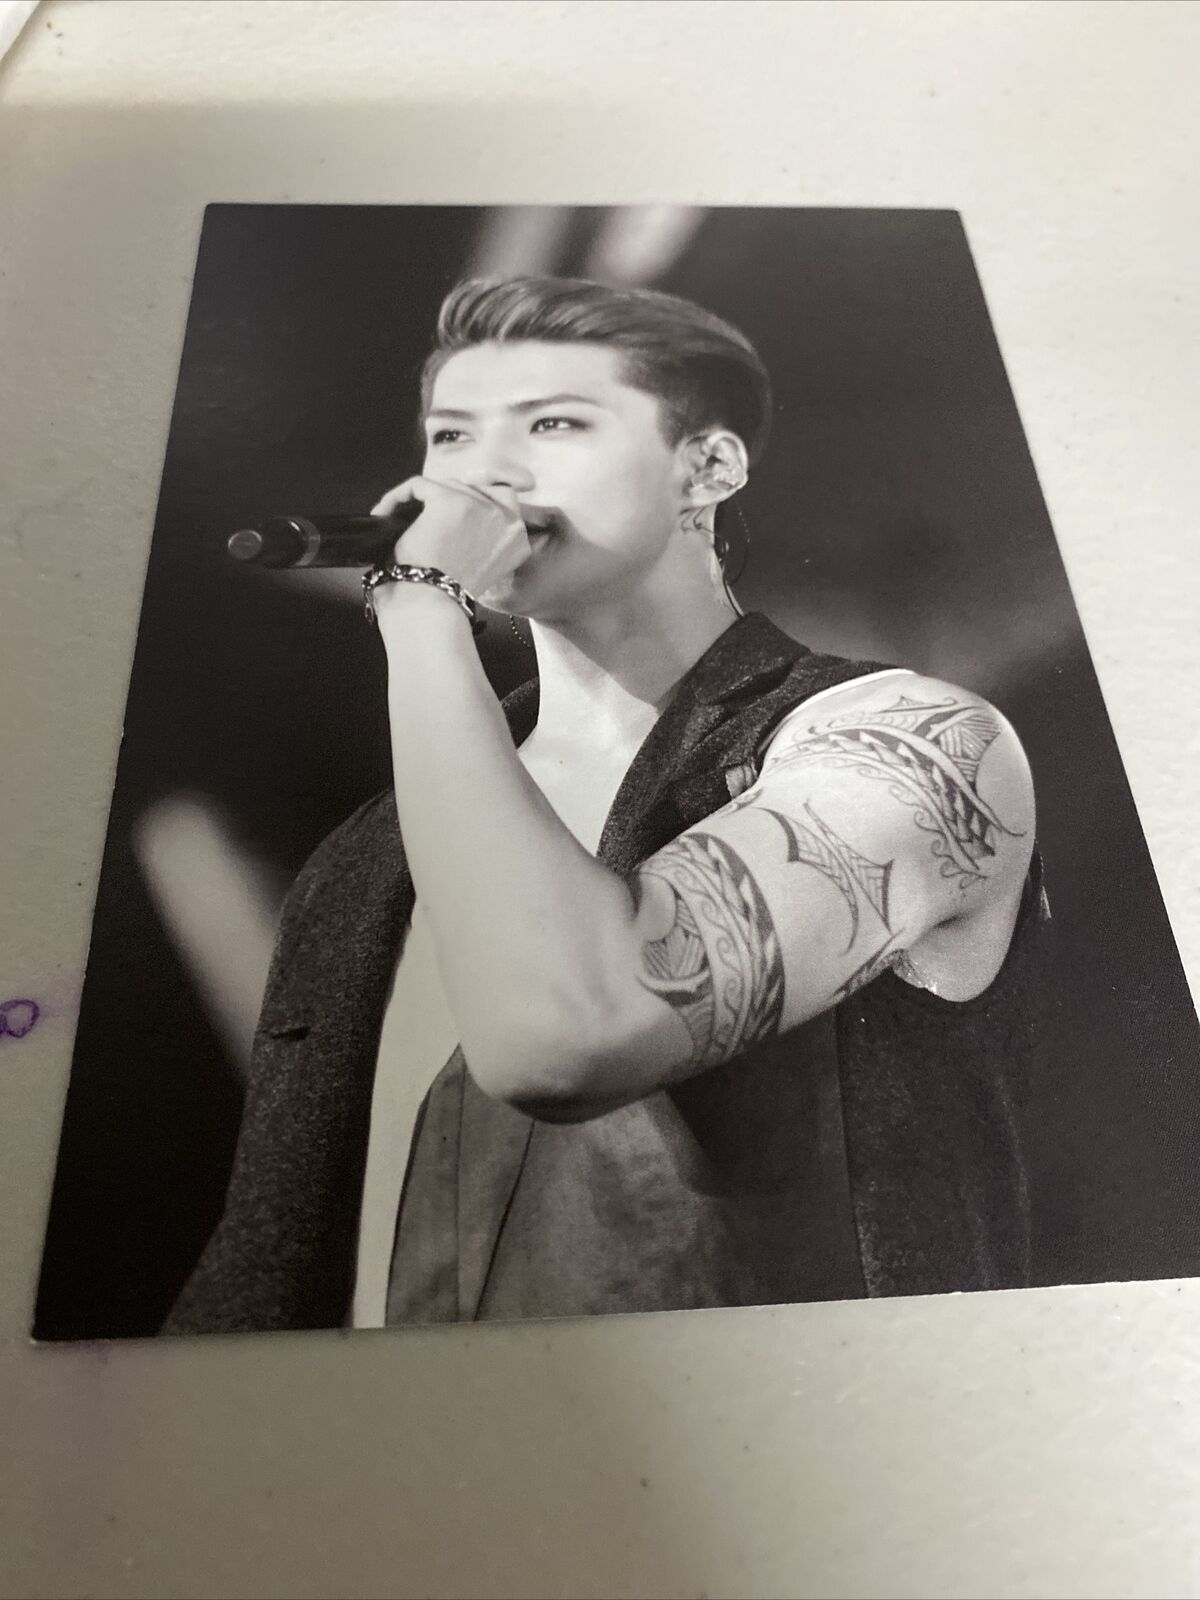 EXO Sehun The Lost Planet Exology Chapter 1 Official Postcard Card Kpop K-pop